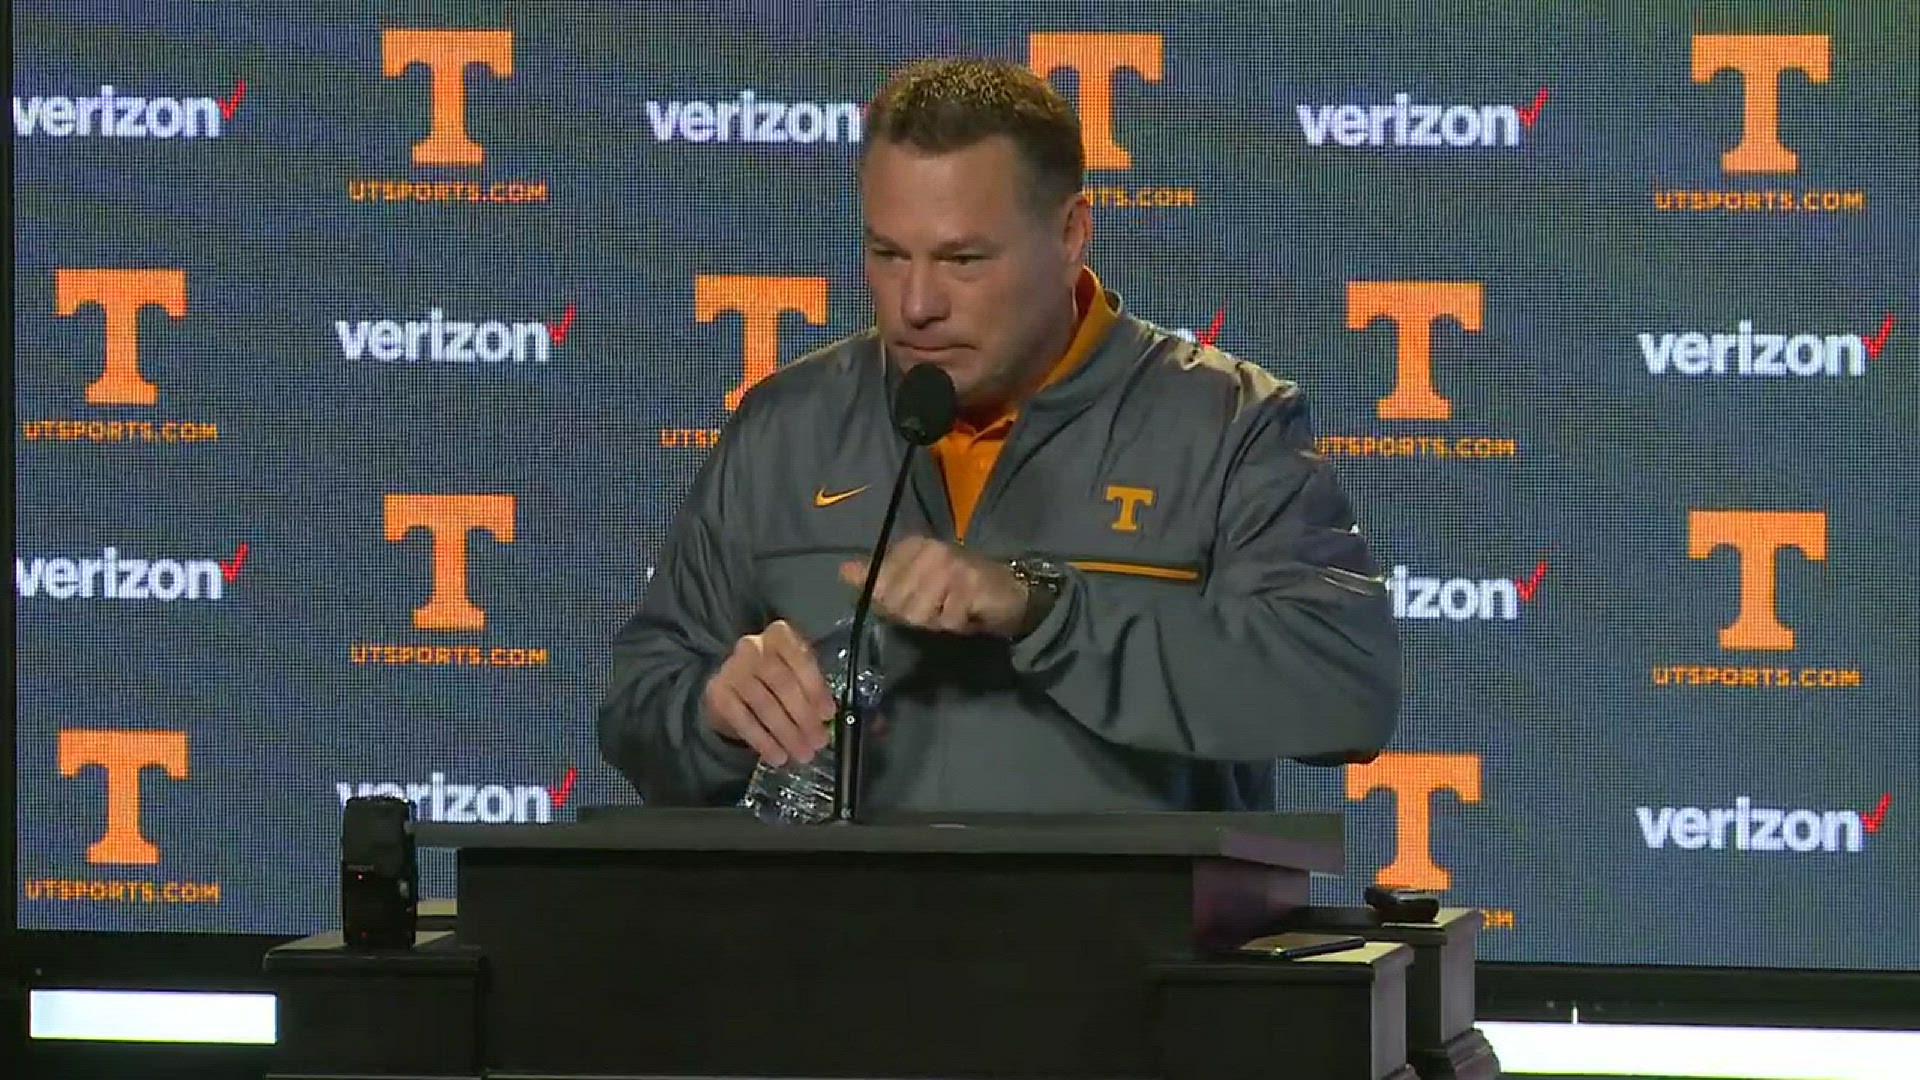 Butch Jones was asked four questions regarding recent conversations with AD John Currie. Here are his responses.